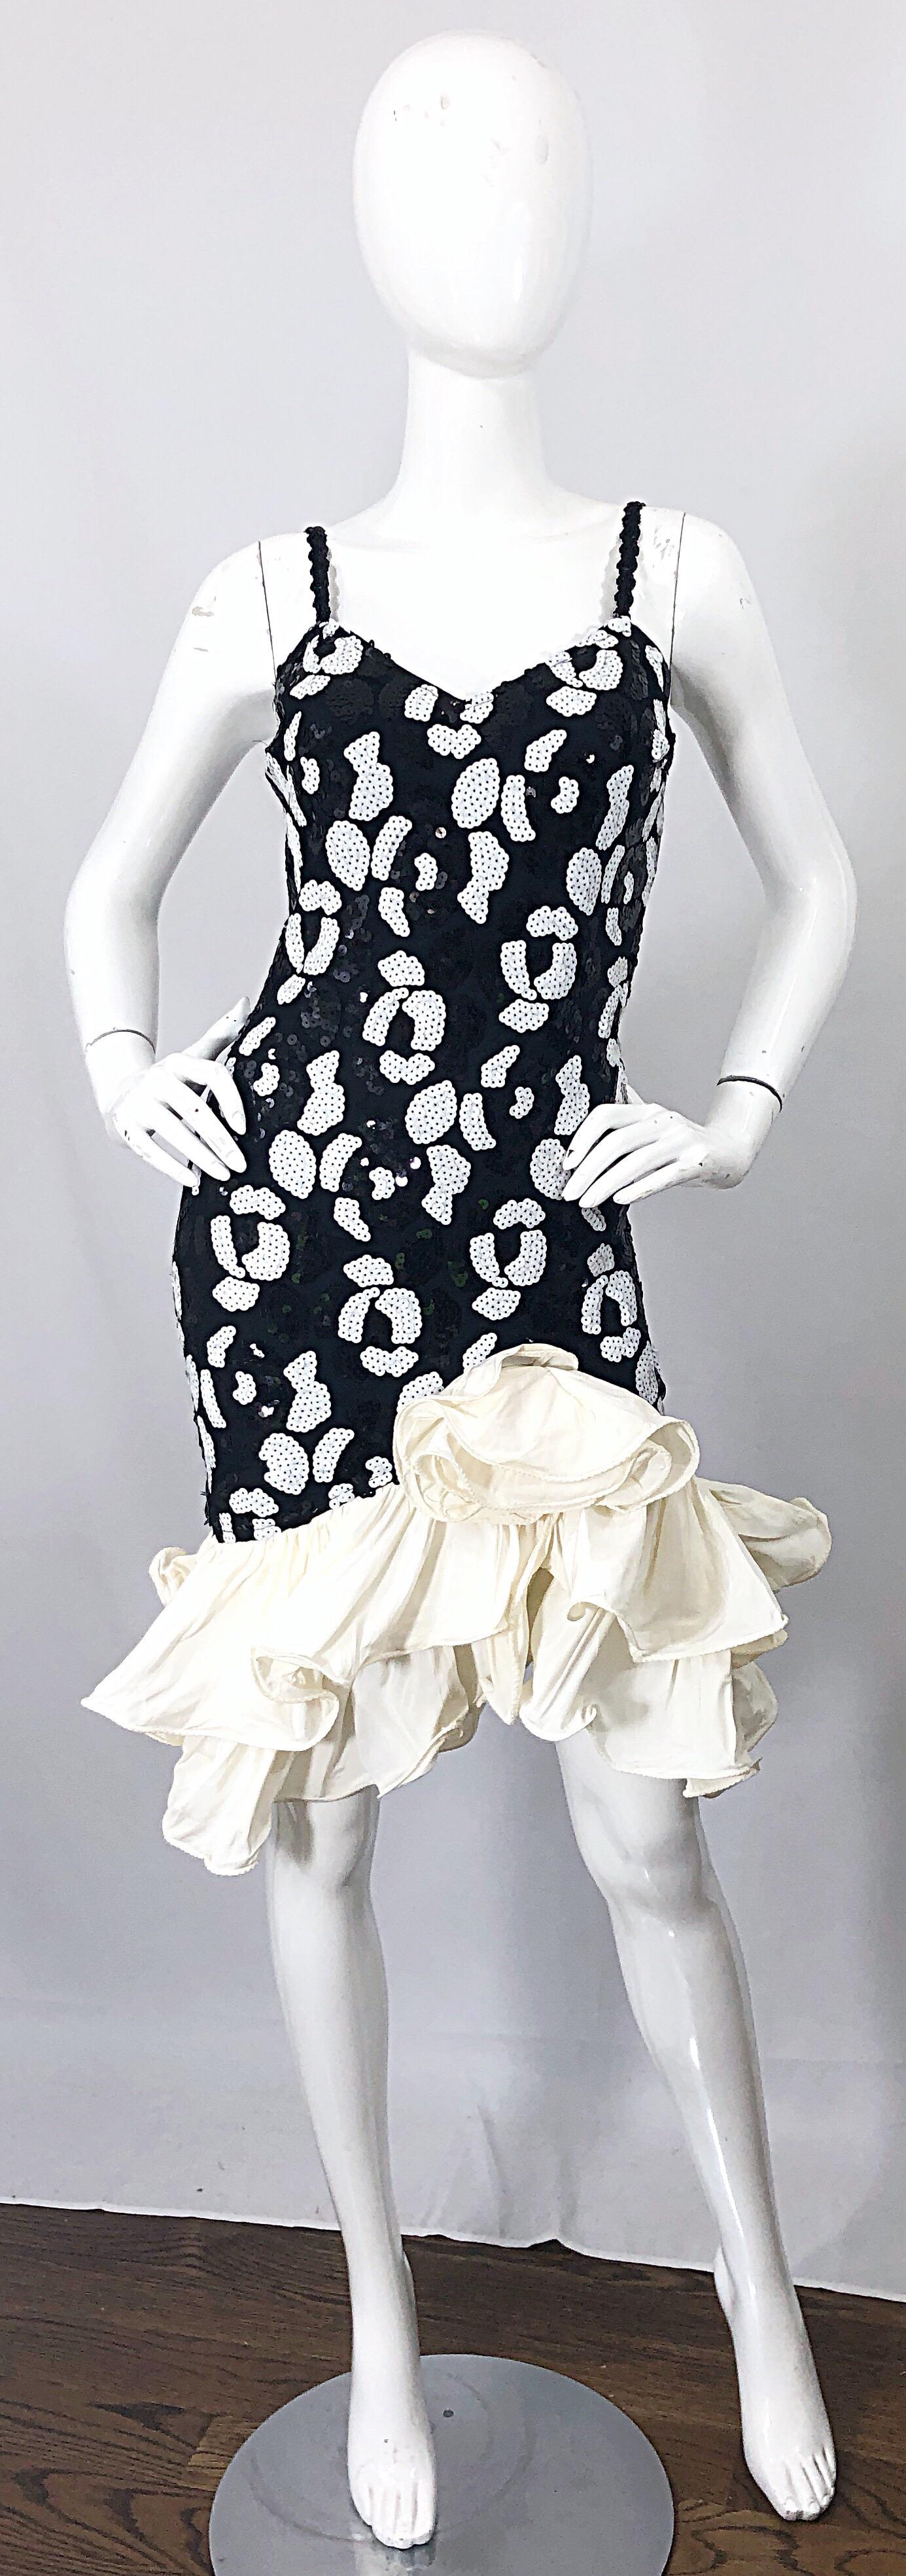 Fabulous late 80s black and white sequined abstract print sleeveless bodcon dress! eateries hundreds of hand-sewn black and white sequins throughout. Avant Garde style with white taffeta poof hem. Hidden zipper up the back with hook-and-eye closure.